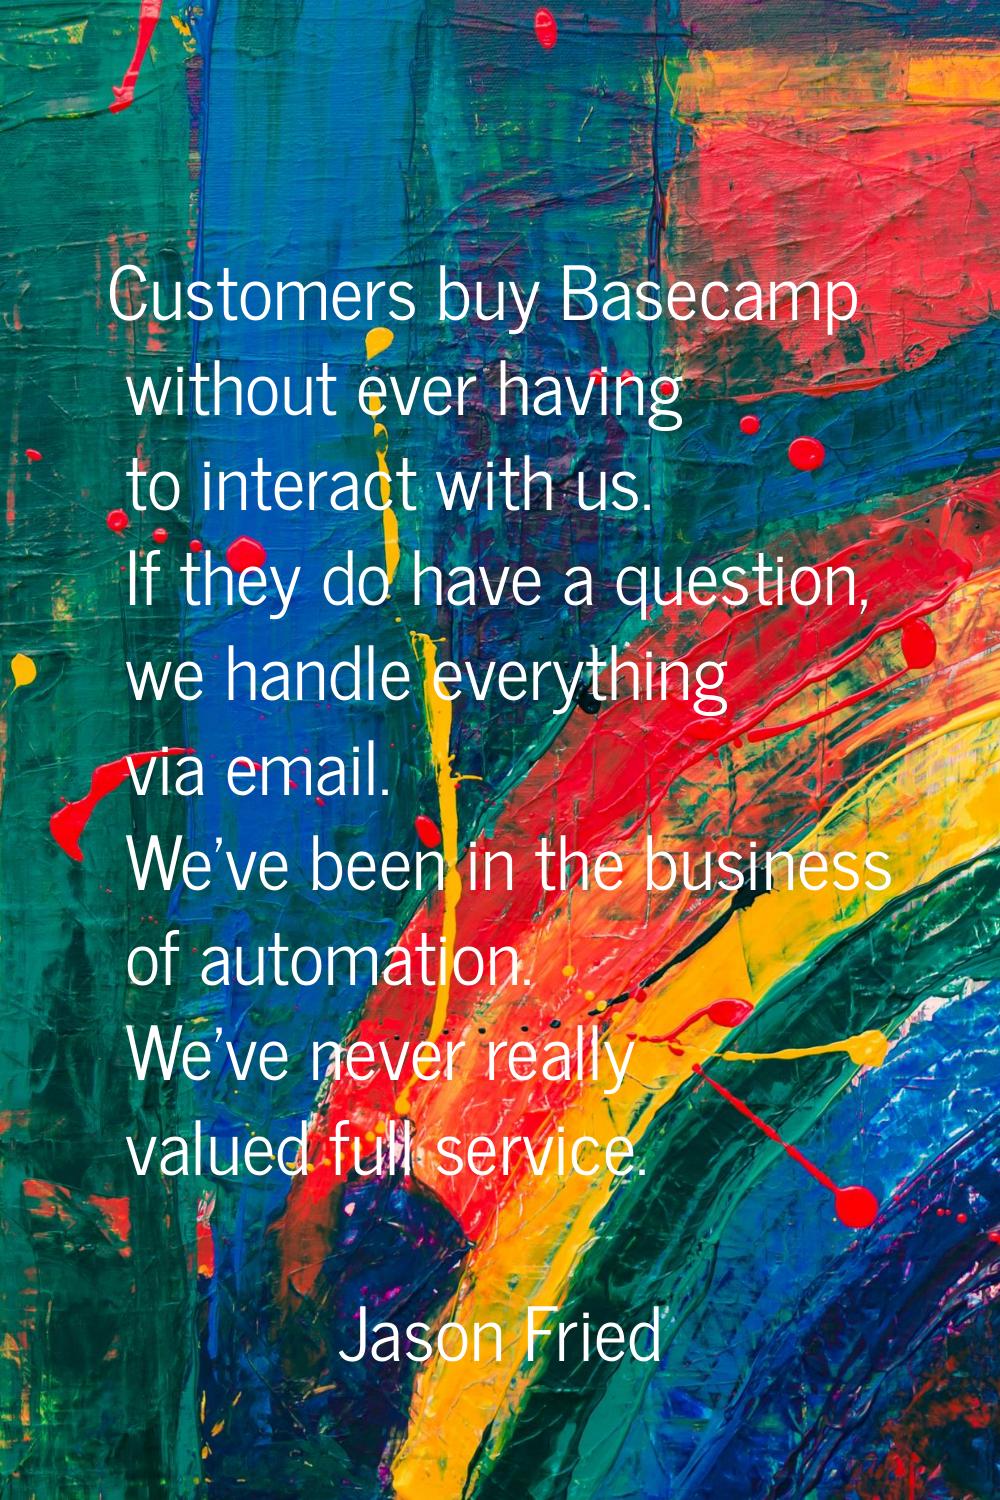 Customers buy Basecamp without ever having to interact with us. If they do have a question, we hand